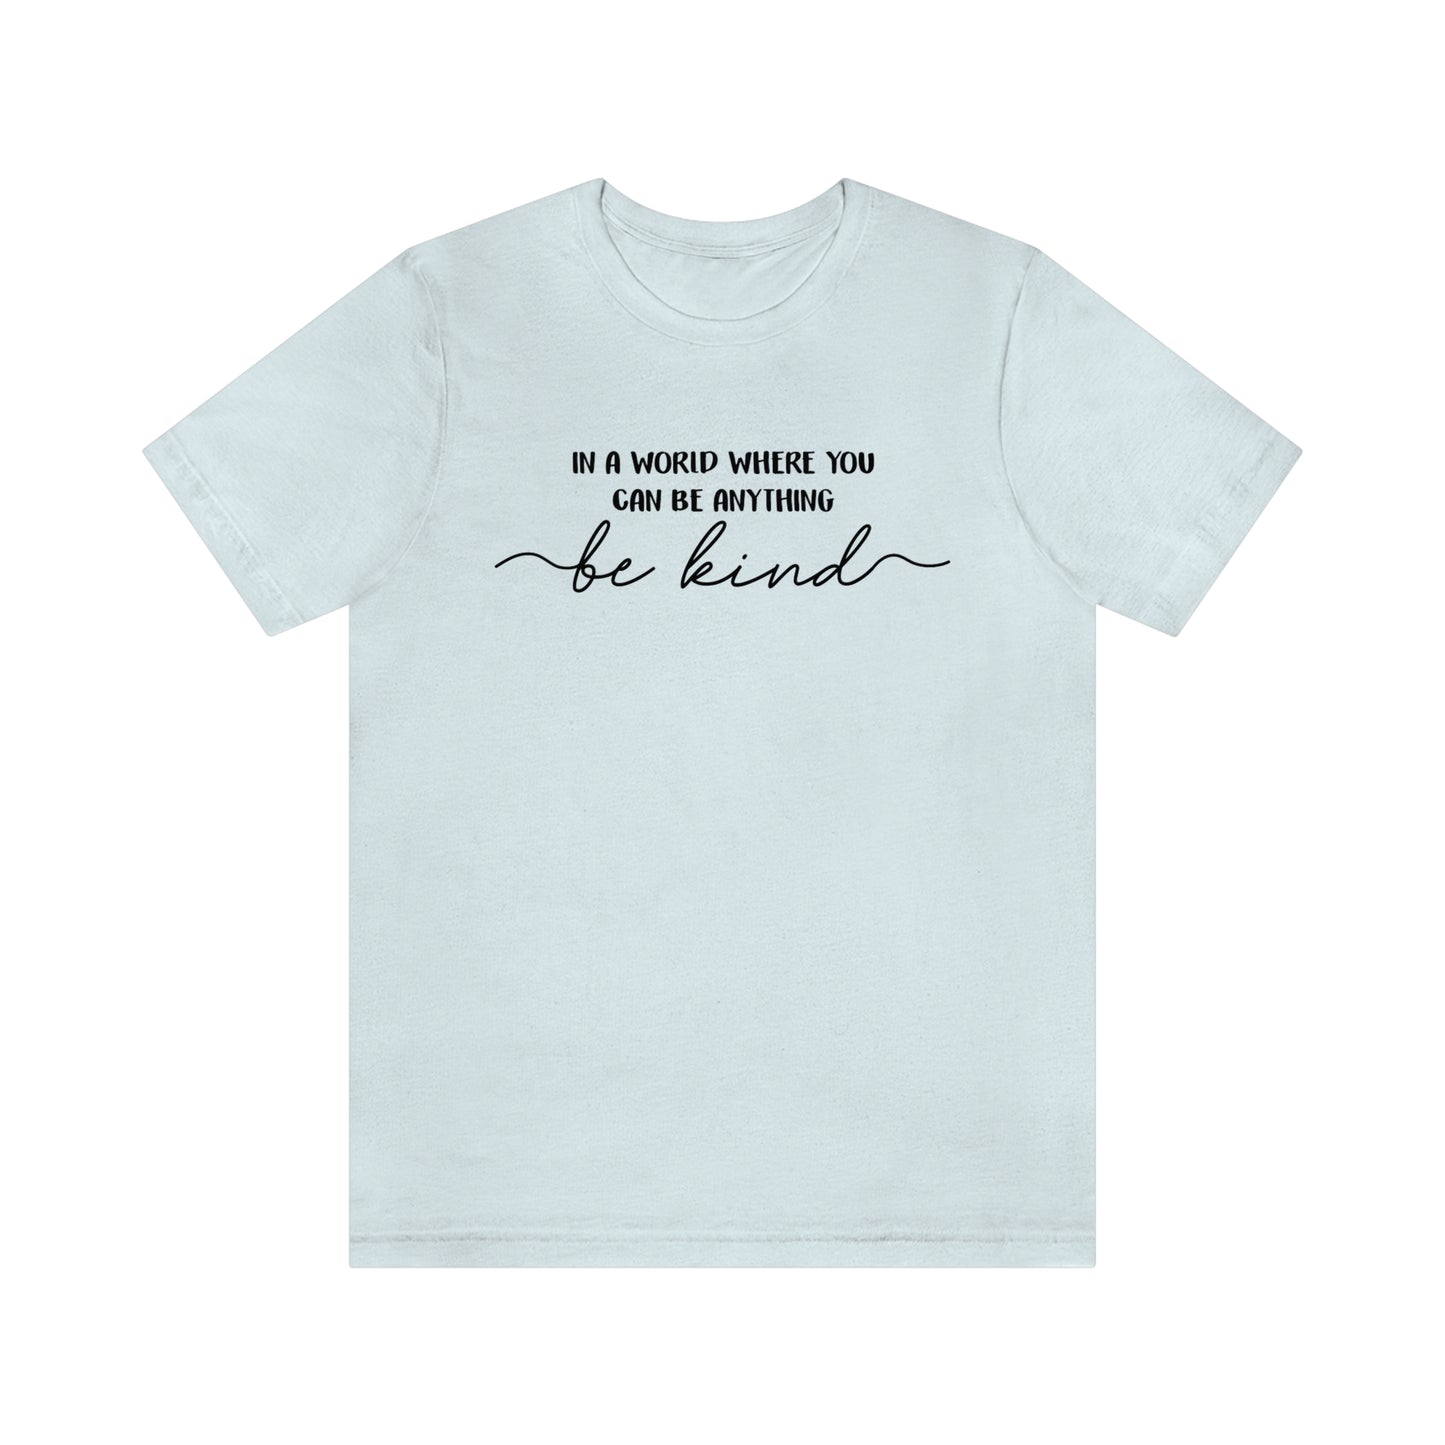 Be Kind Shirt, In A World Where You Can Be Anything Be Kind Shirt, Kindness Shirt, Teacher Shirt, Anti-Racism Shirt, Bible Verse Shirt